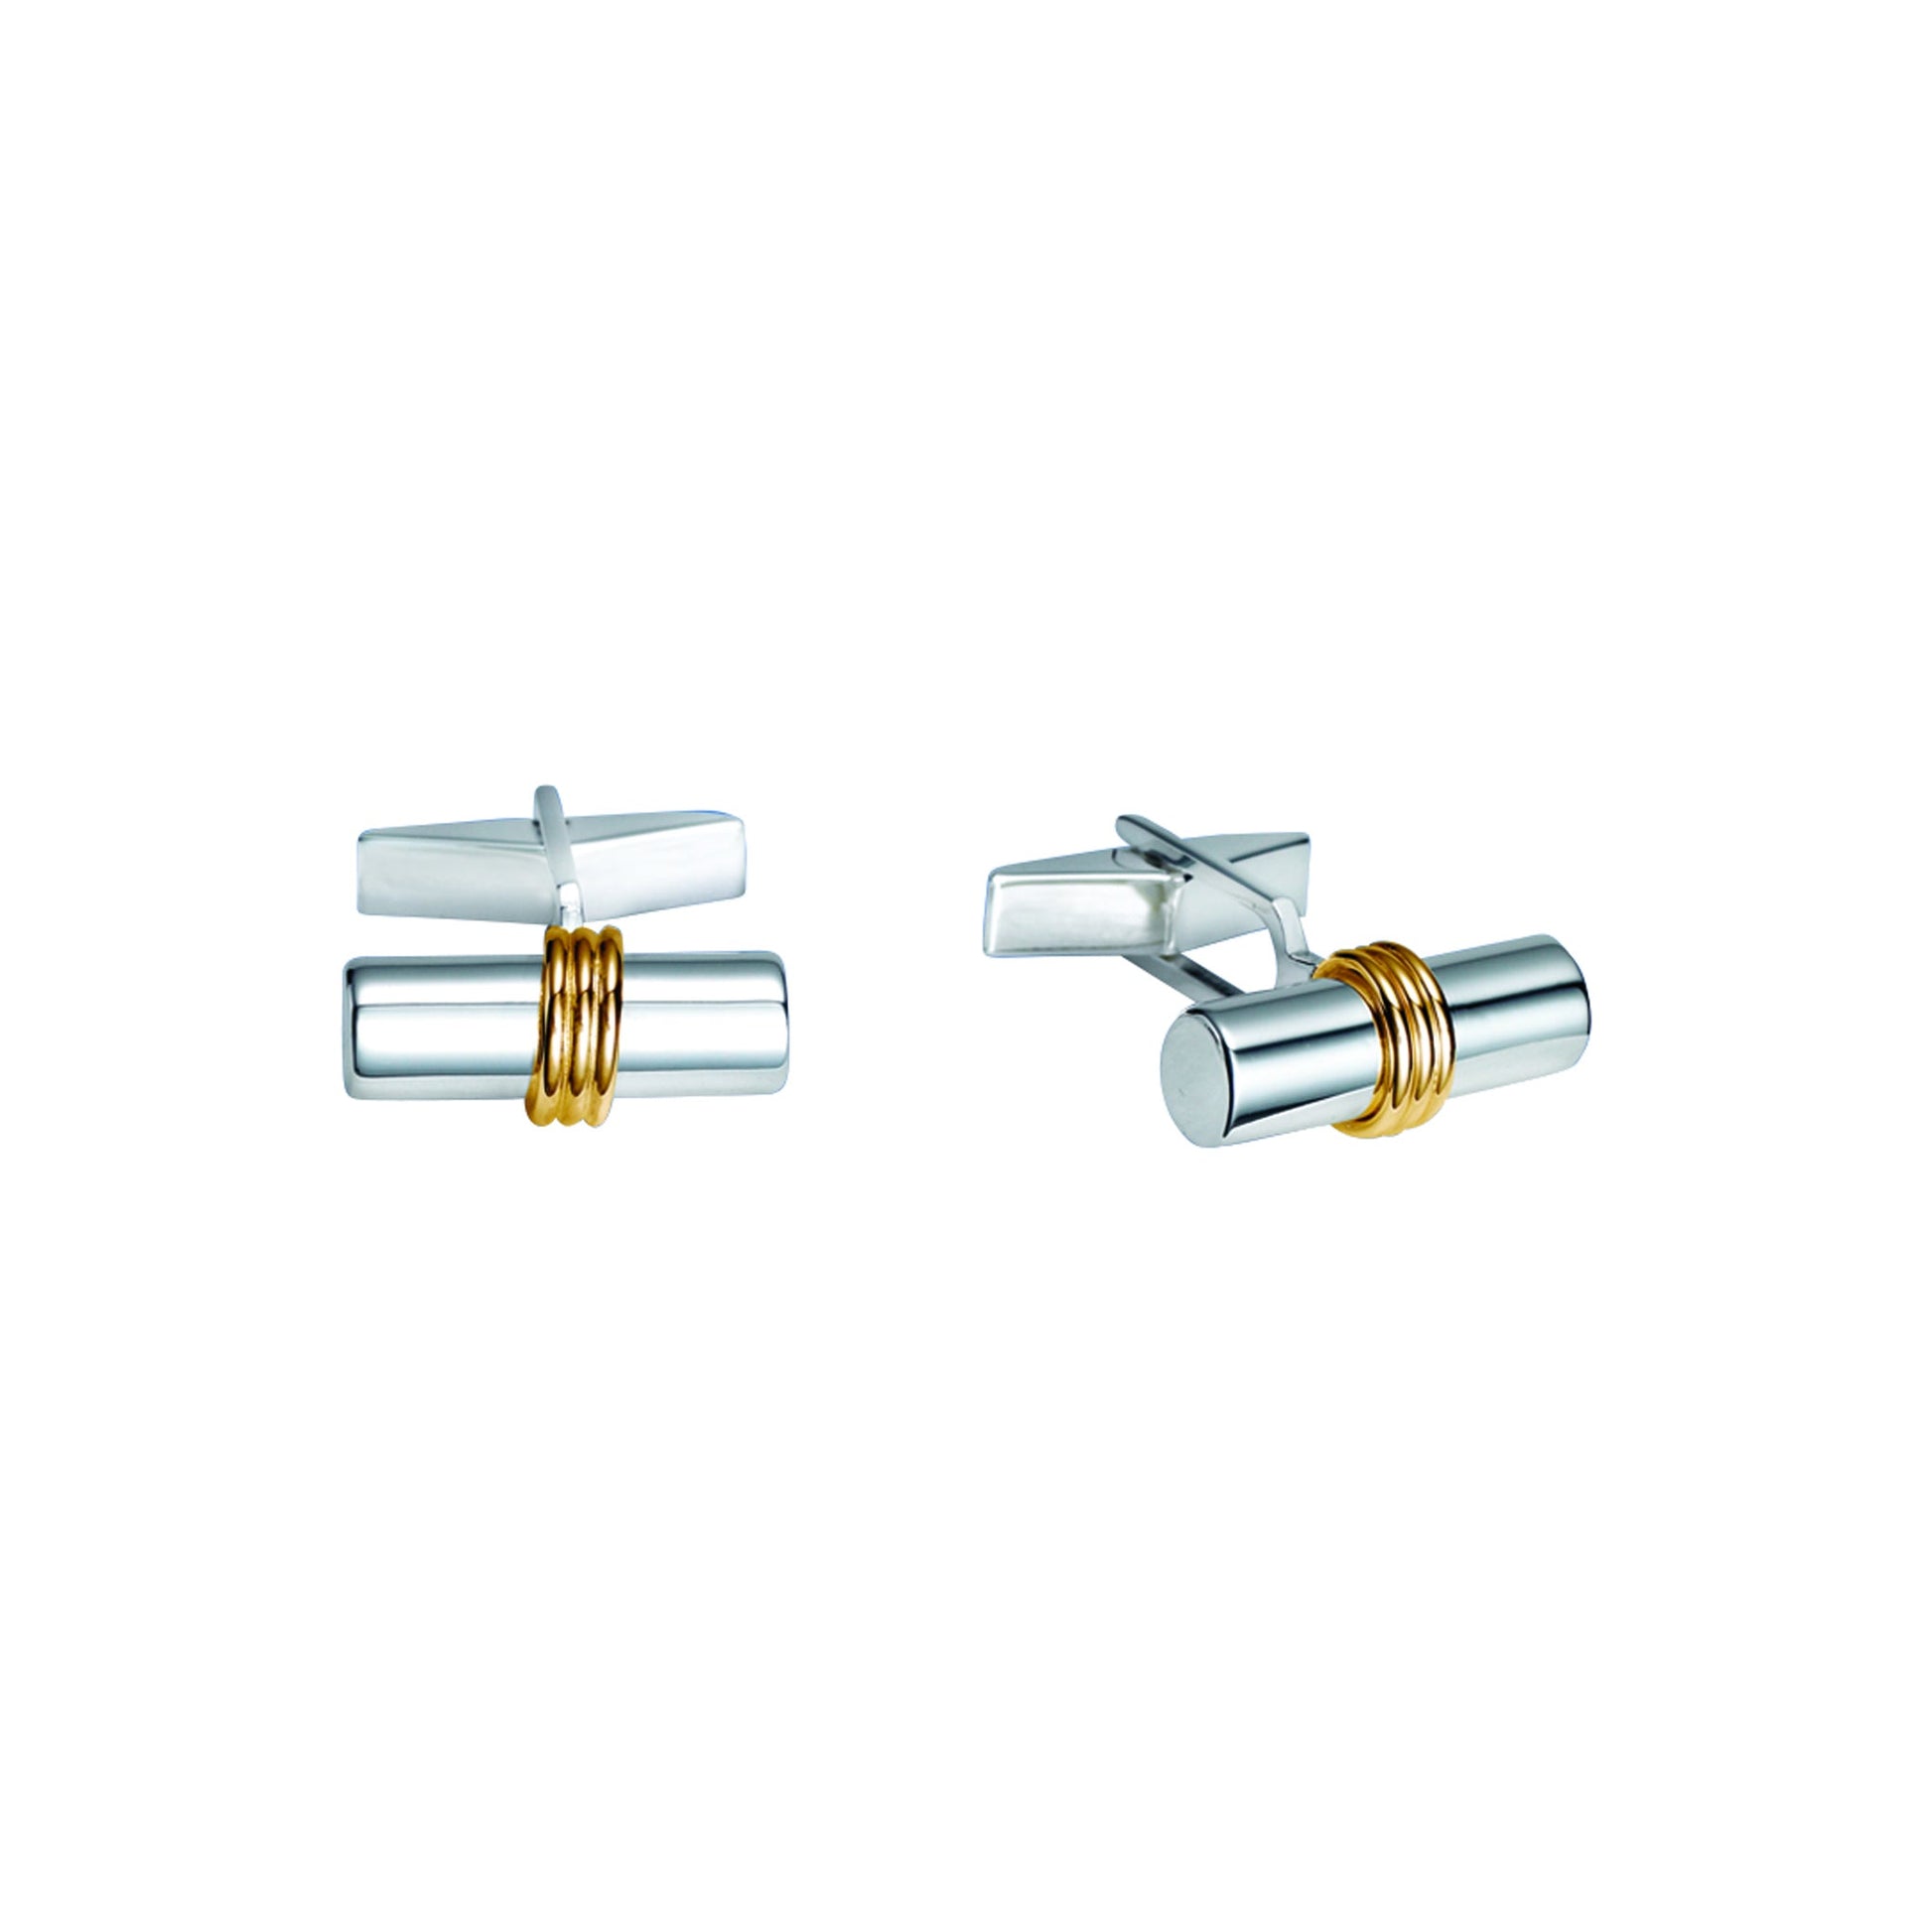 A sterling silver round & 18k yellow gold wire cufflinks displayed on a neutral white background.